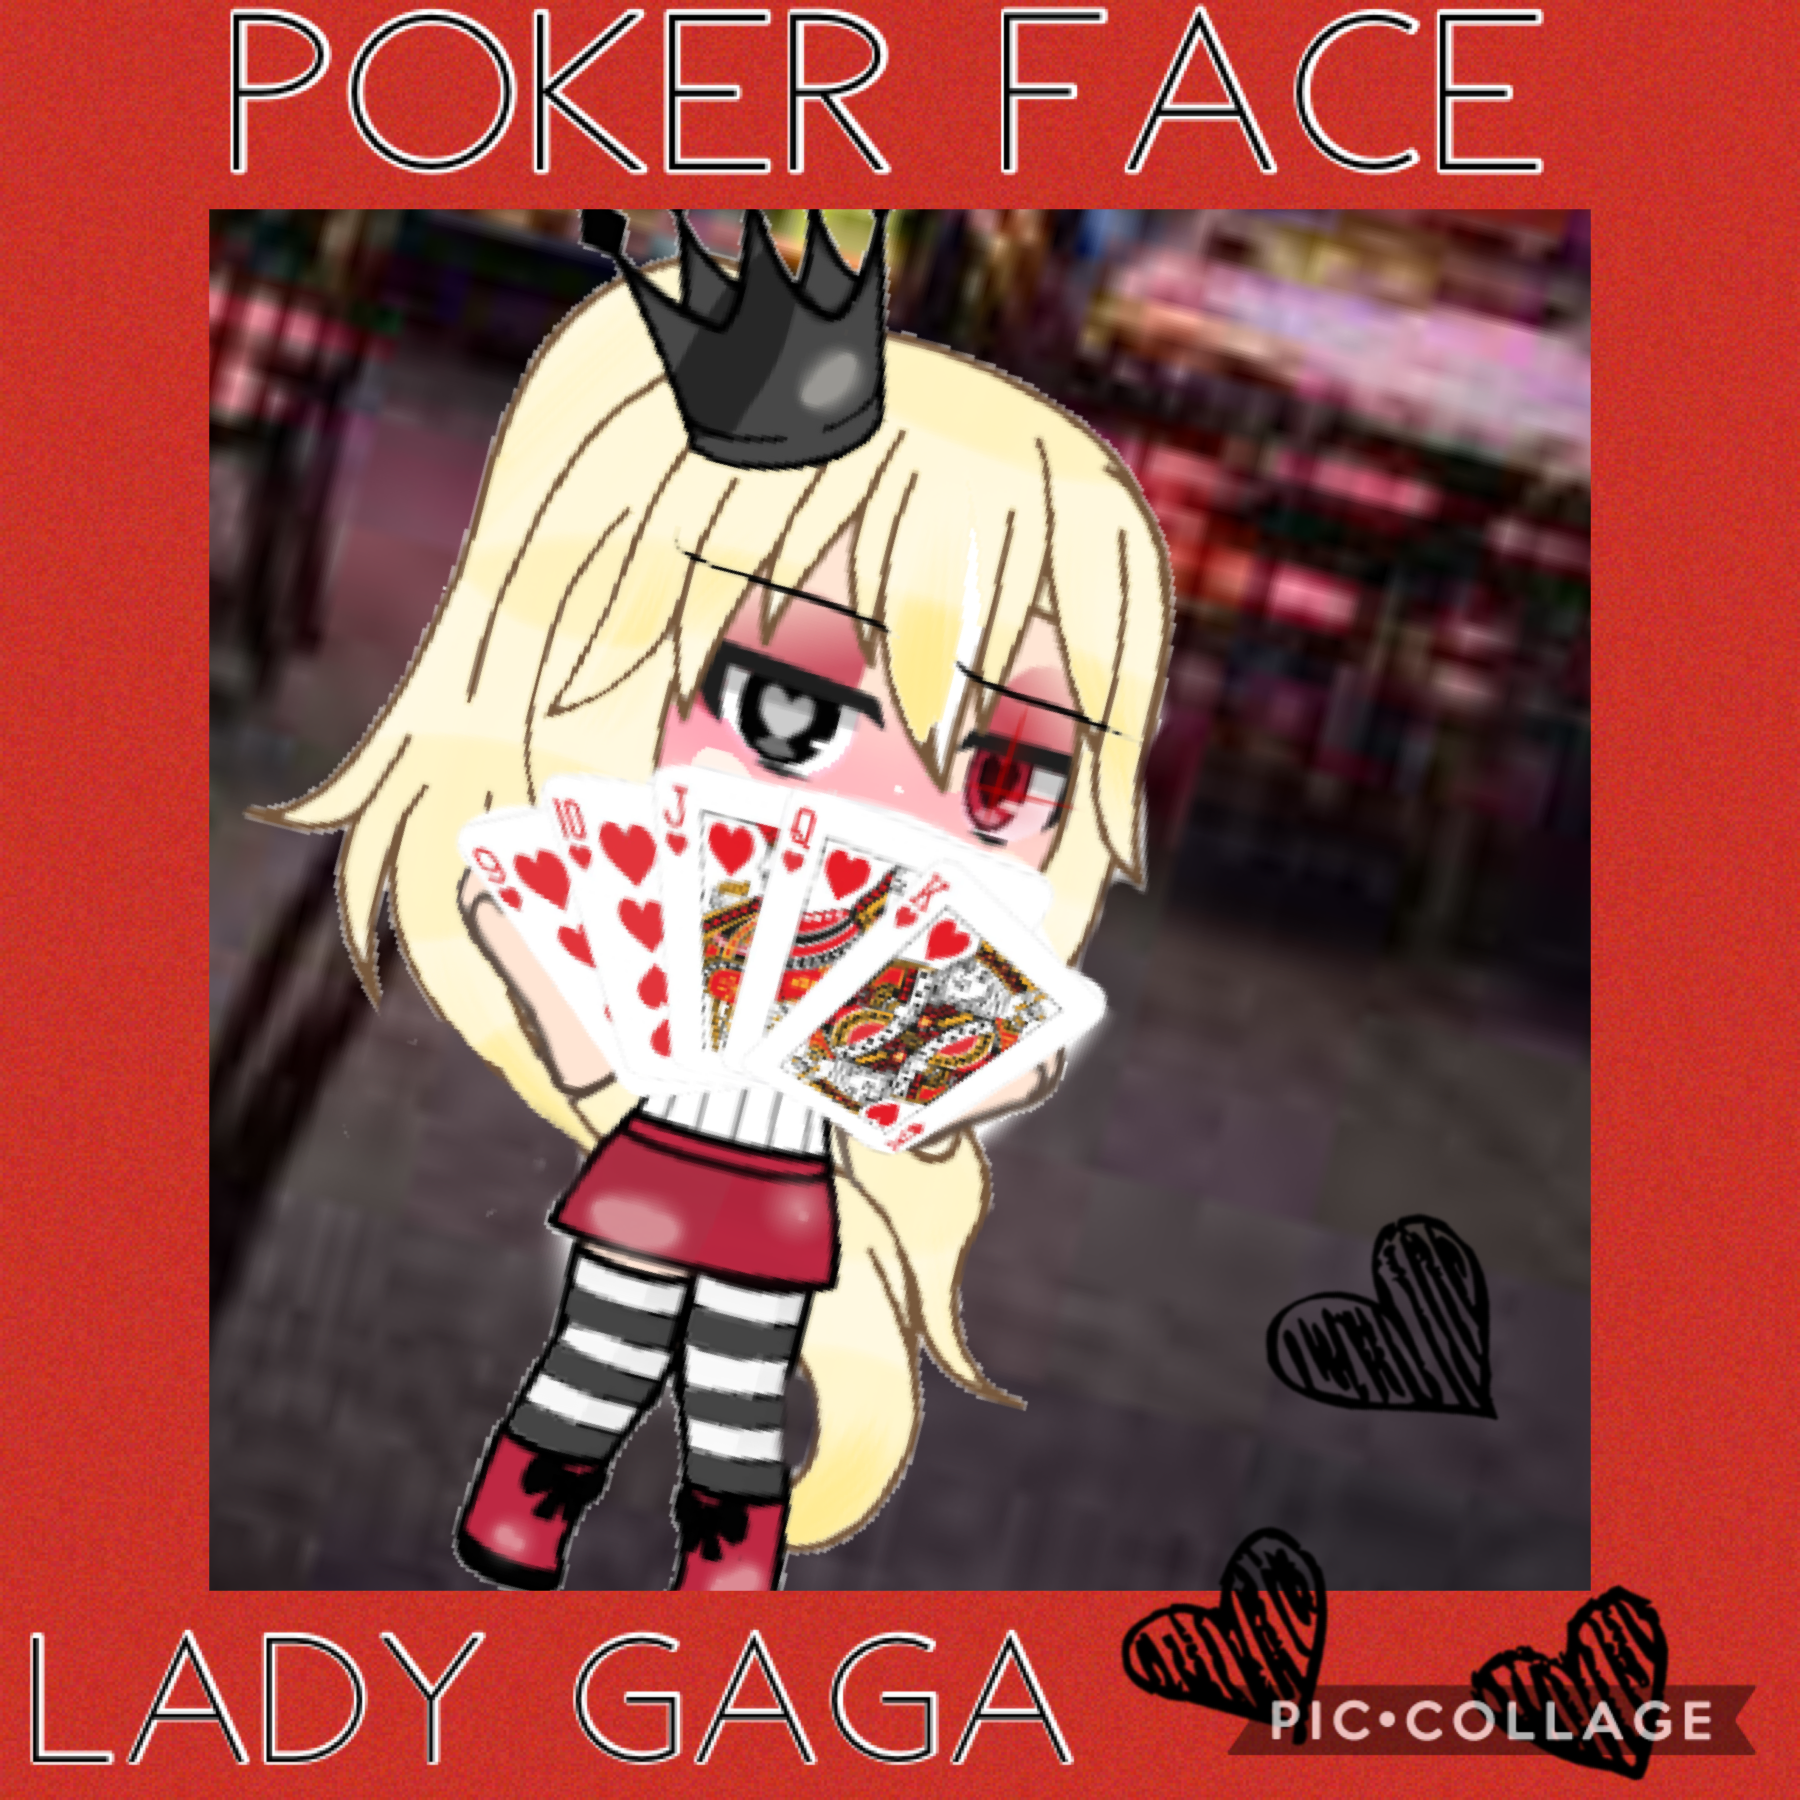 I edited this ( still not the best at it) hope you like it! ♥️♦️🃏♠️♣️